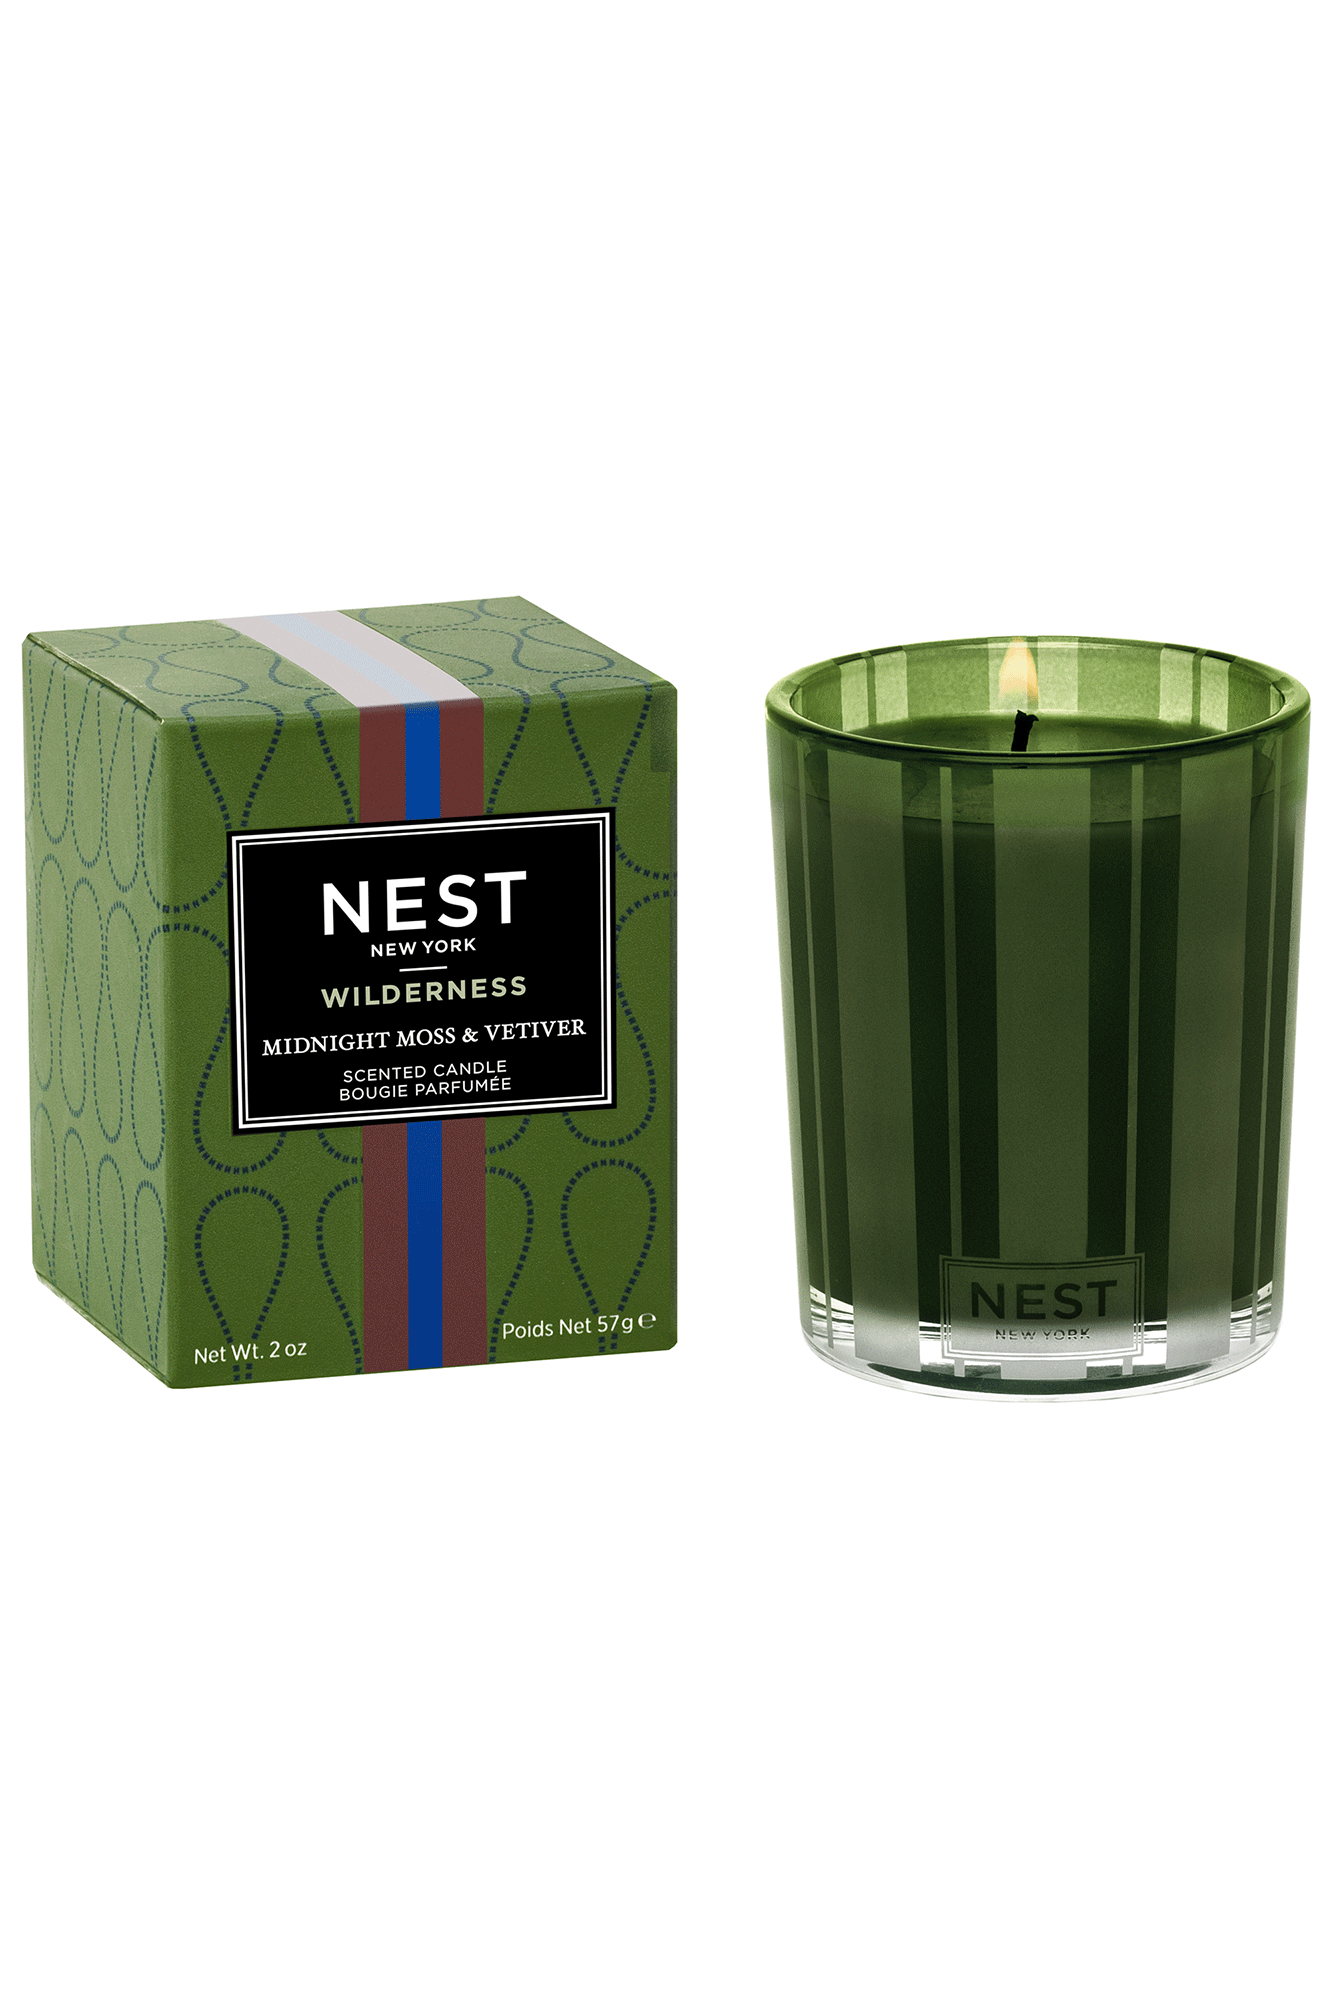 Brighten up your home with the Midnight Moss & Vetiver Votive Candle from Nest. Featuring a proprietary premium wax blend, this exquisitely scented candle provides a clean and even burn while subtly filling your space with a luxurious scent. Enjoy your favorite fragrance longer with this high-quality candle.